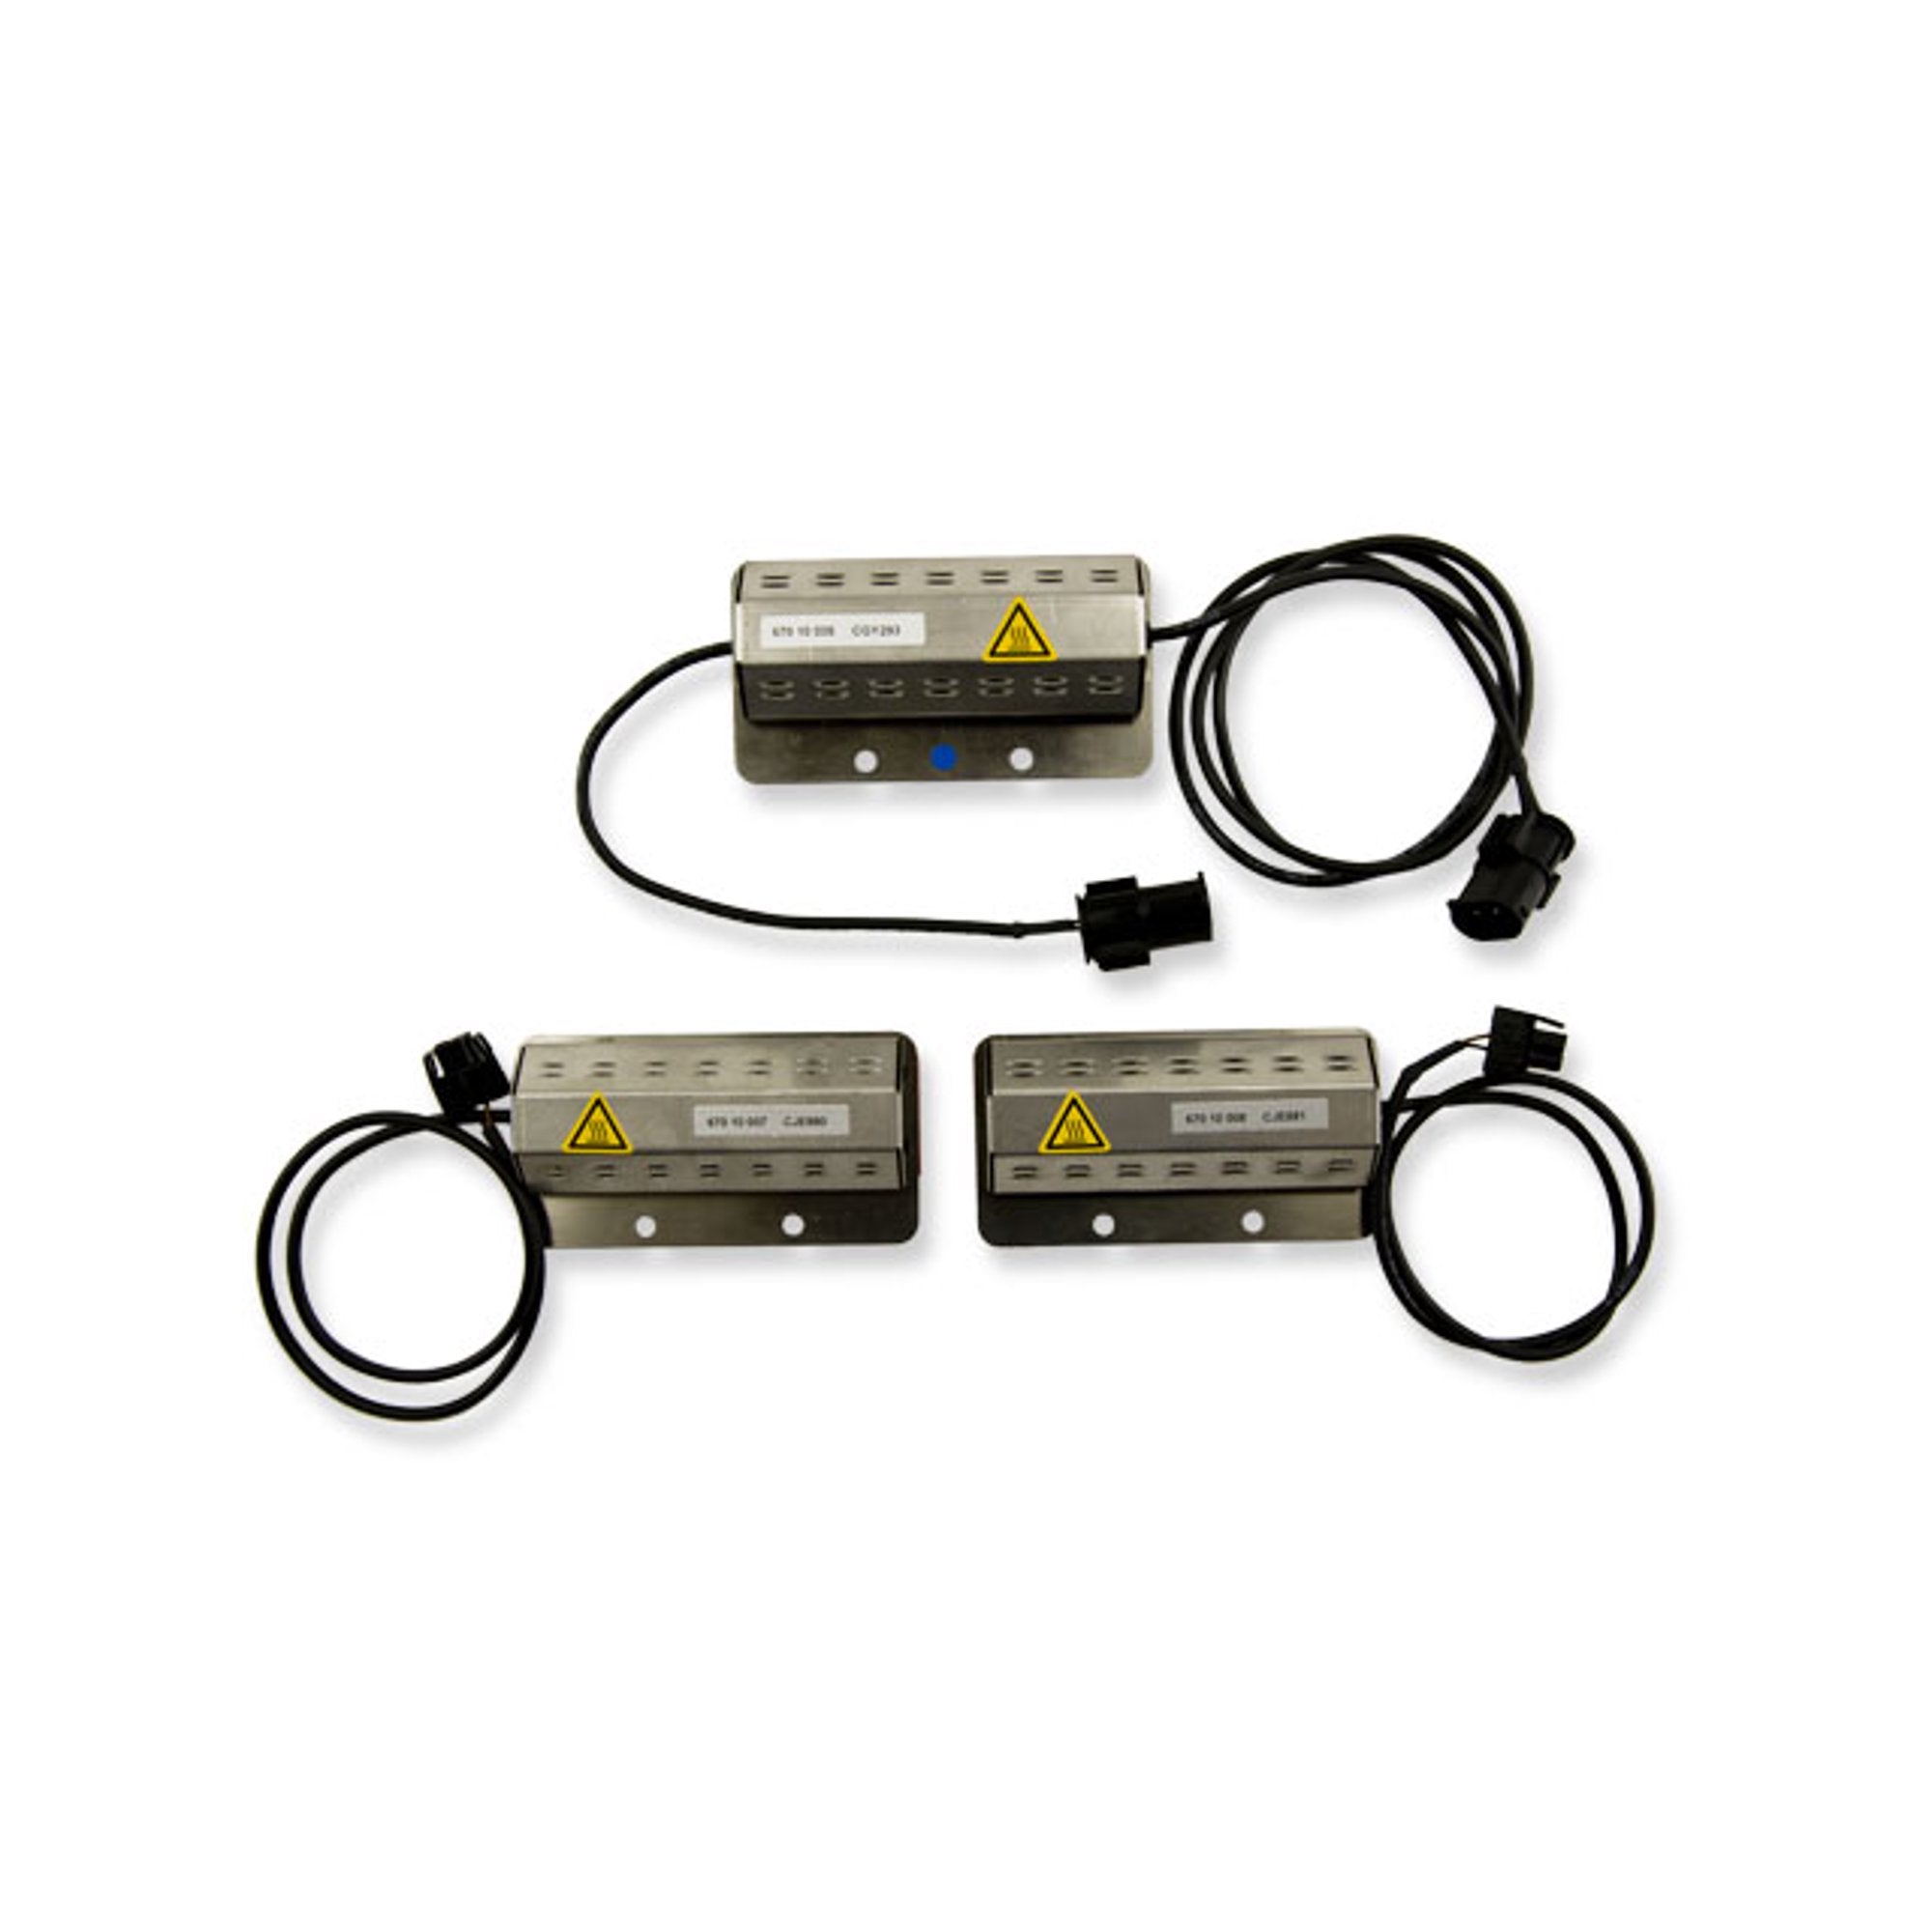 KW Electronic Damping Cancellation Kit for 15+ Volkswagen VII GTI